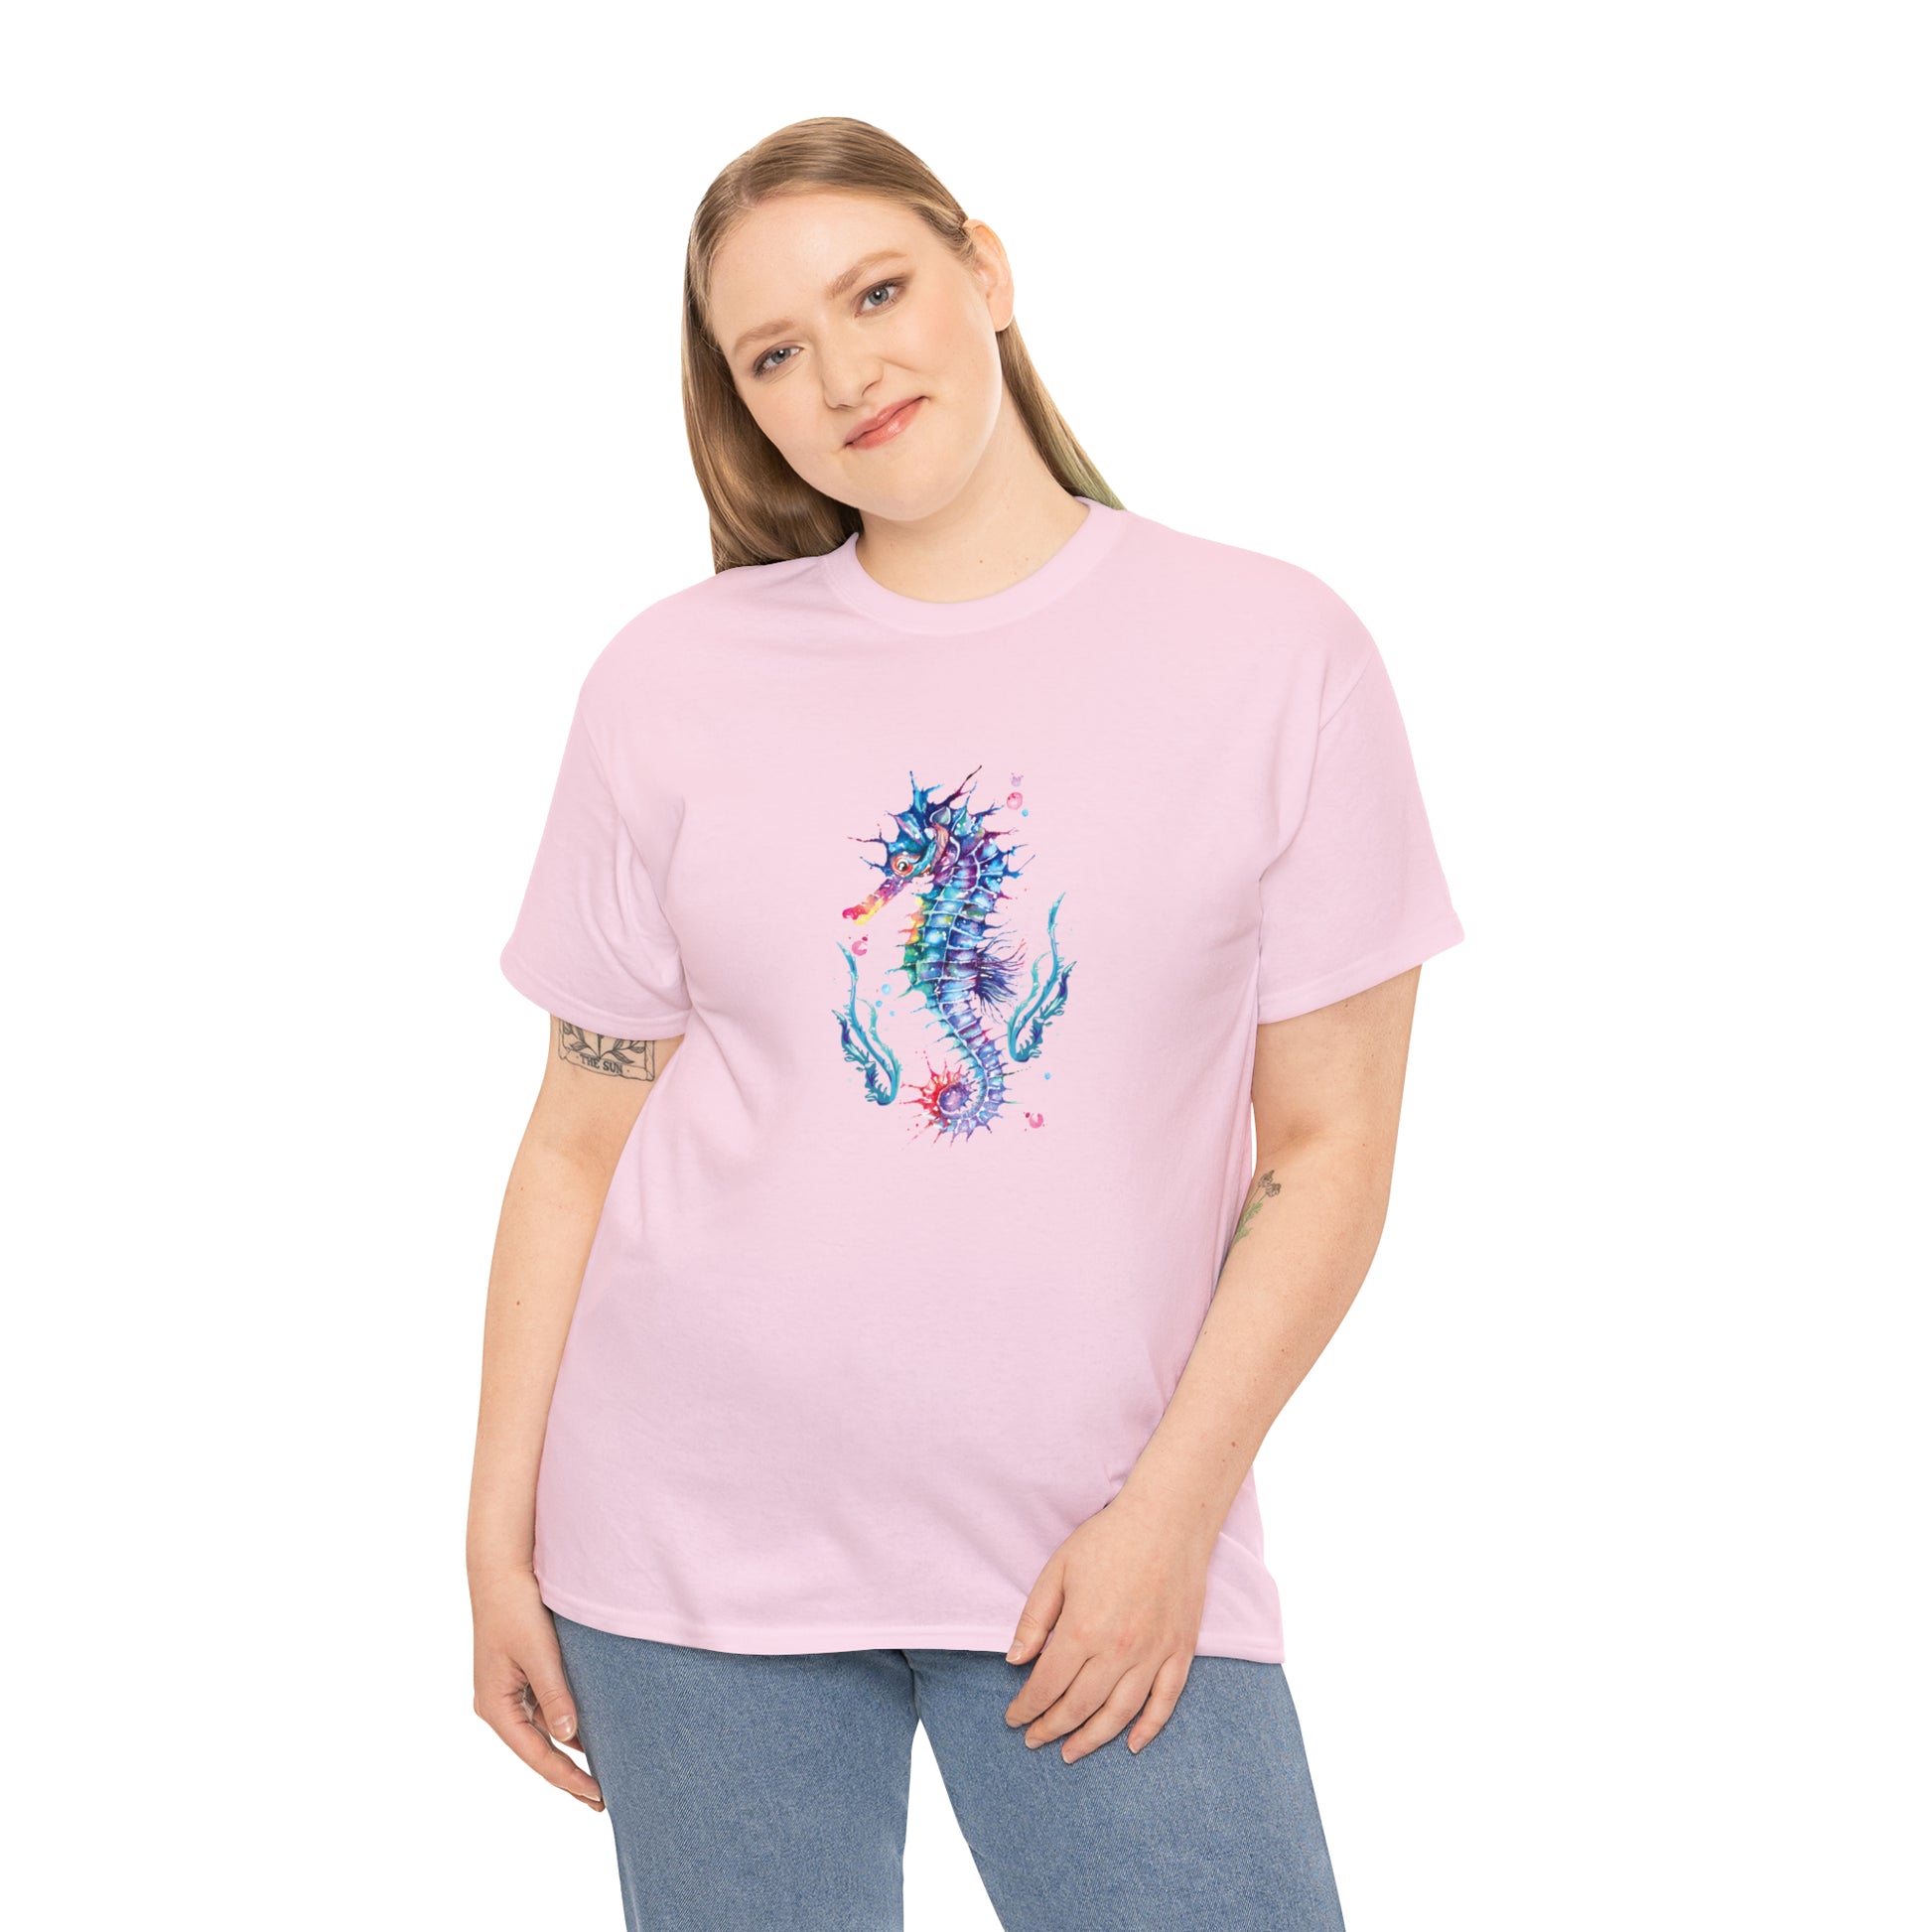 Mock up of a blonde-haired woman wearing the Pink shirt